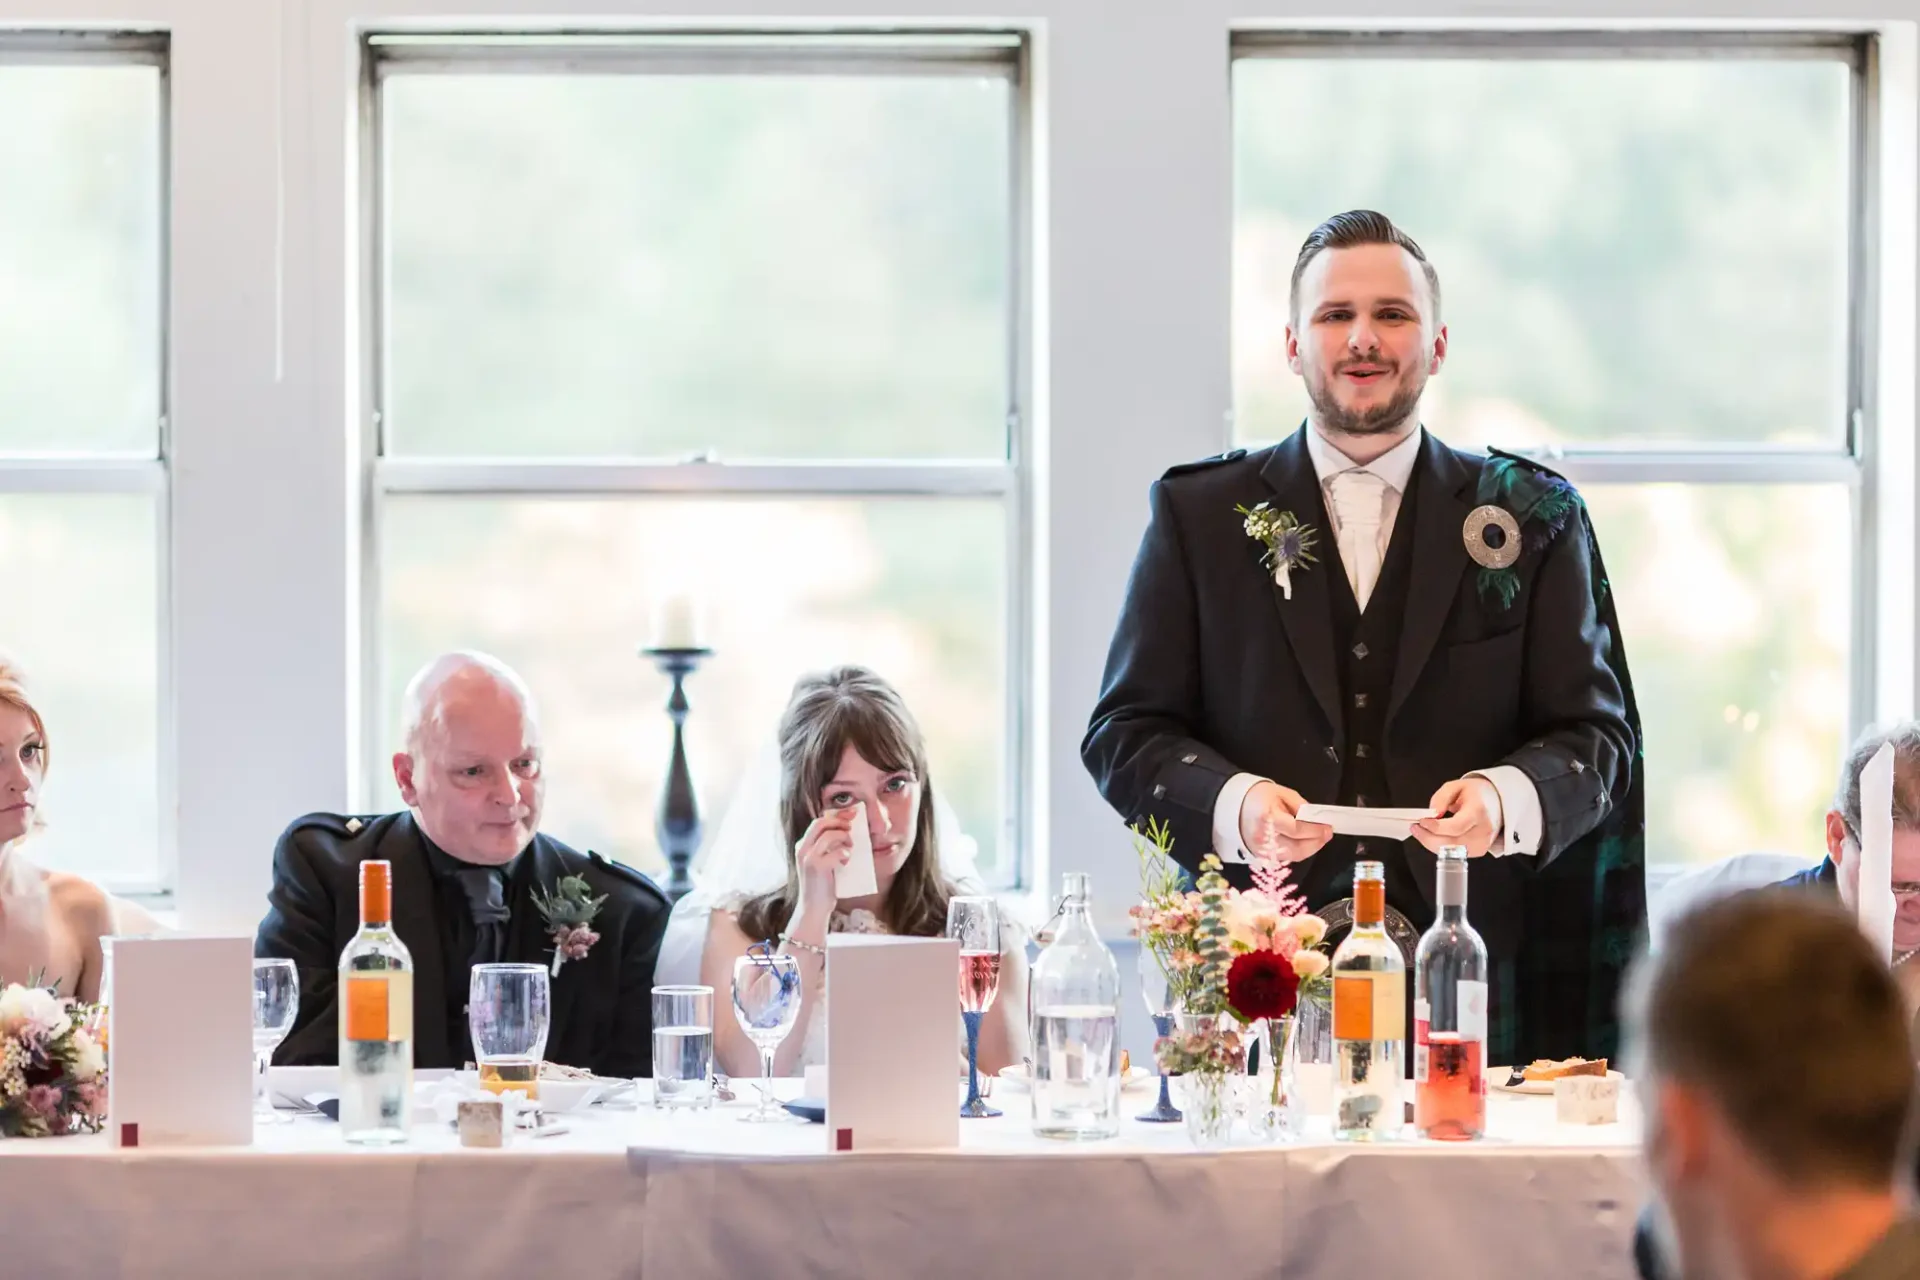 Groom standing and giving a speech at a wedding reception, with guests seated around tables listening.